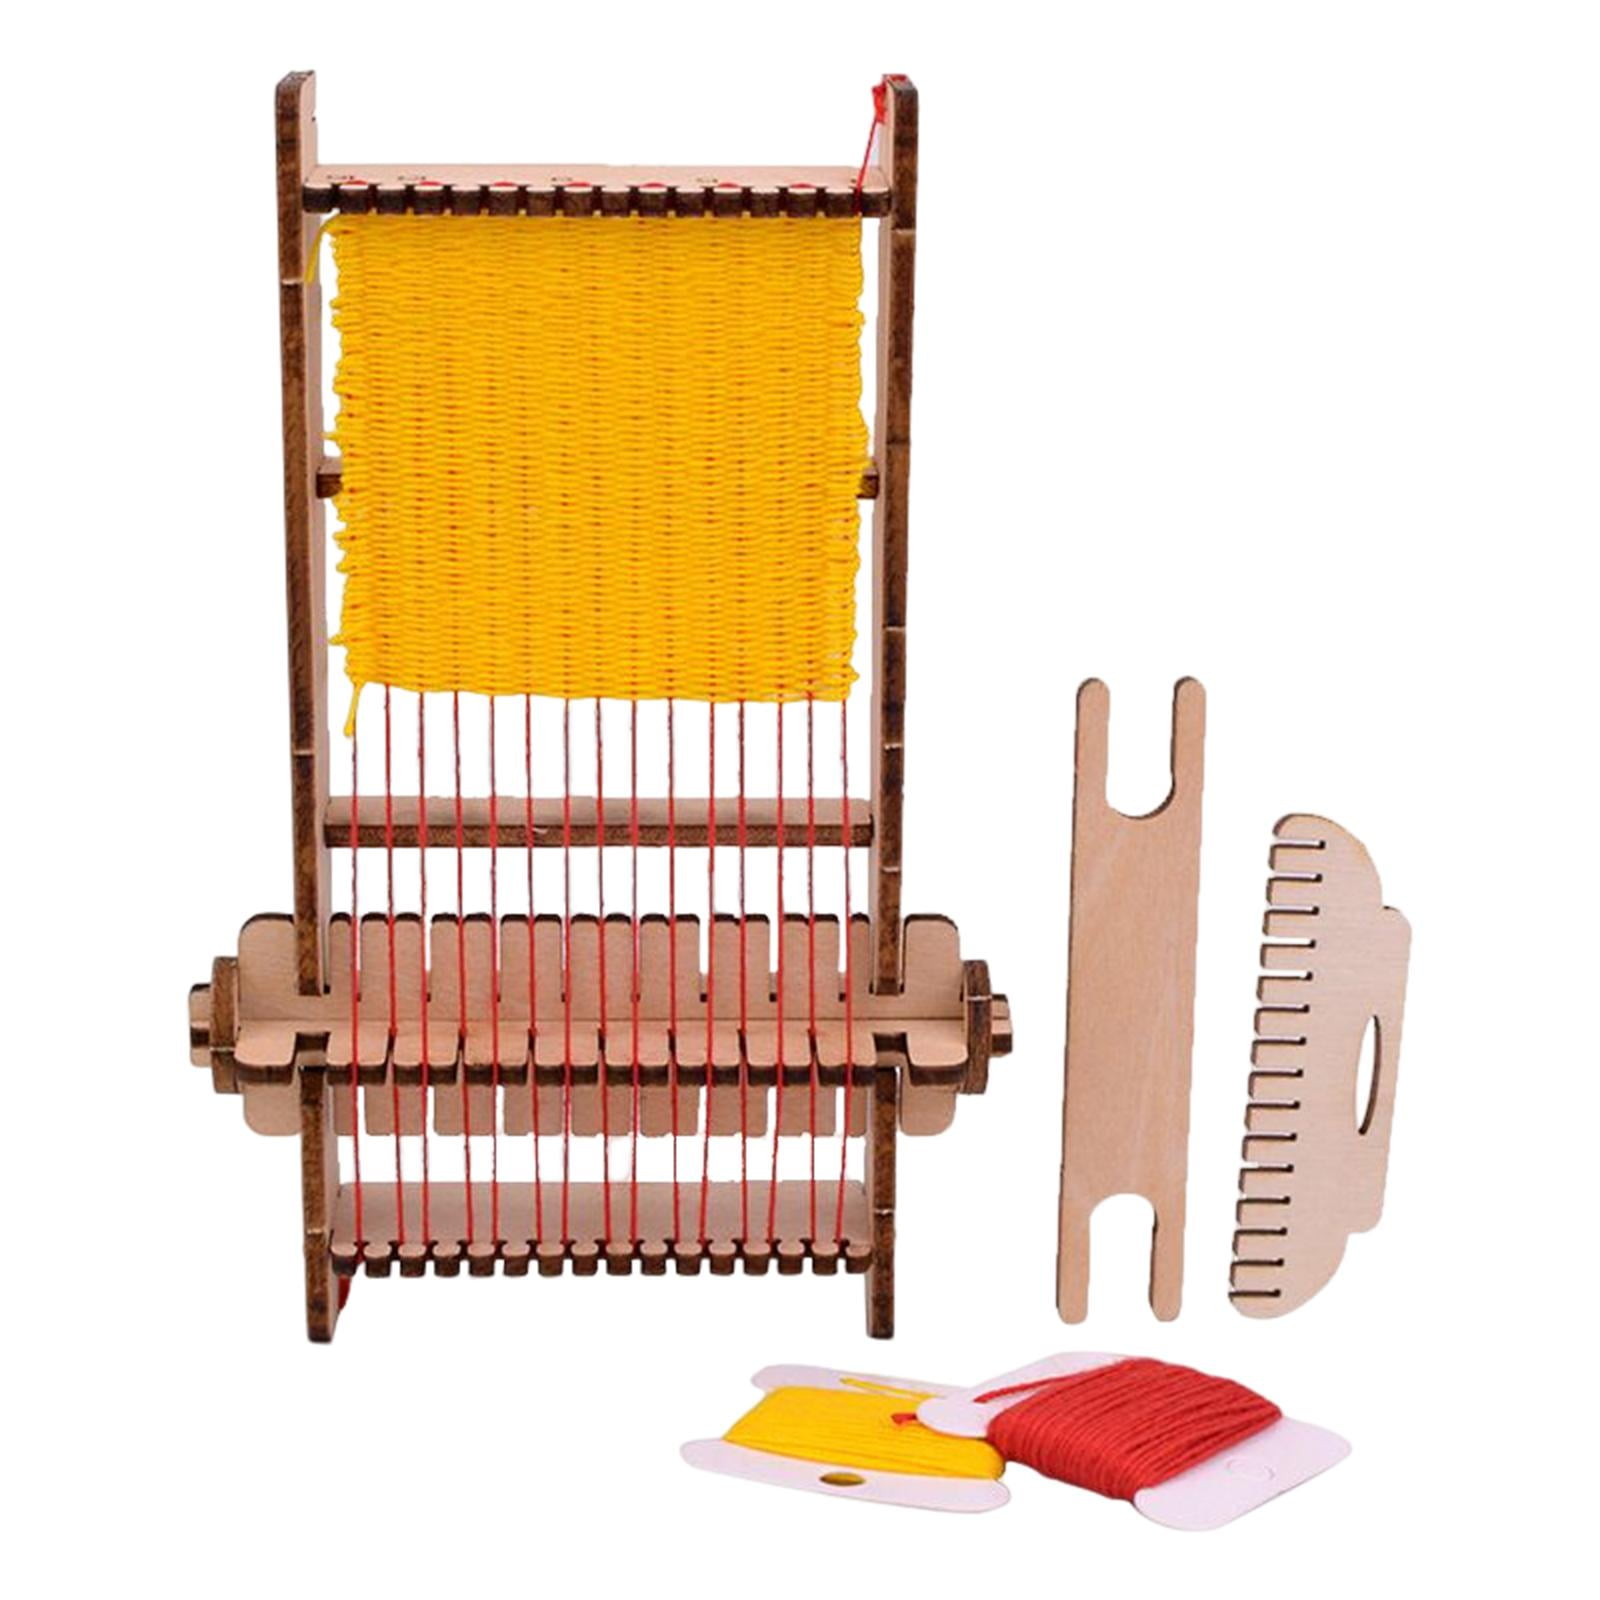 Teissuly Knitting Machine,22 Needles Knitting Machine,Smart Weave Knitting  Round Loom Knitting Machines Knitting Board Rotating Double Knit Loom  Machine Kit for Adults/Kids DIY Knit Scarf Hat Sock 